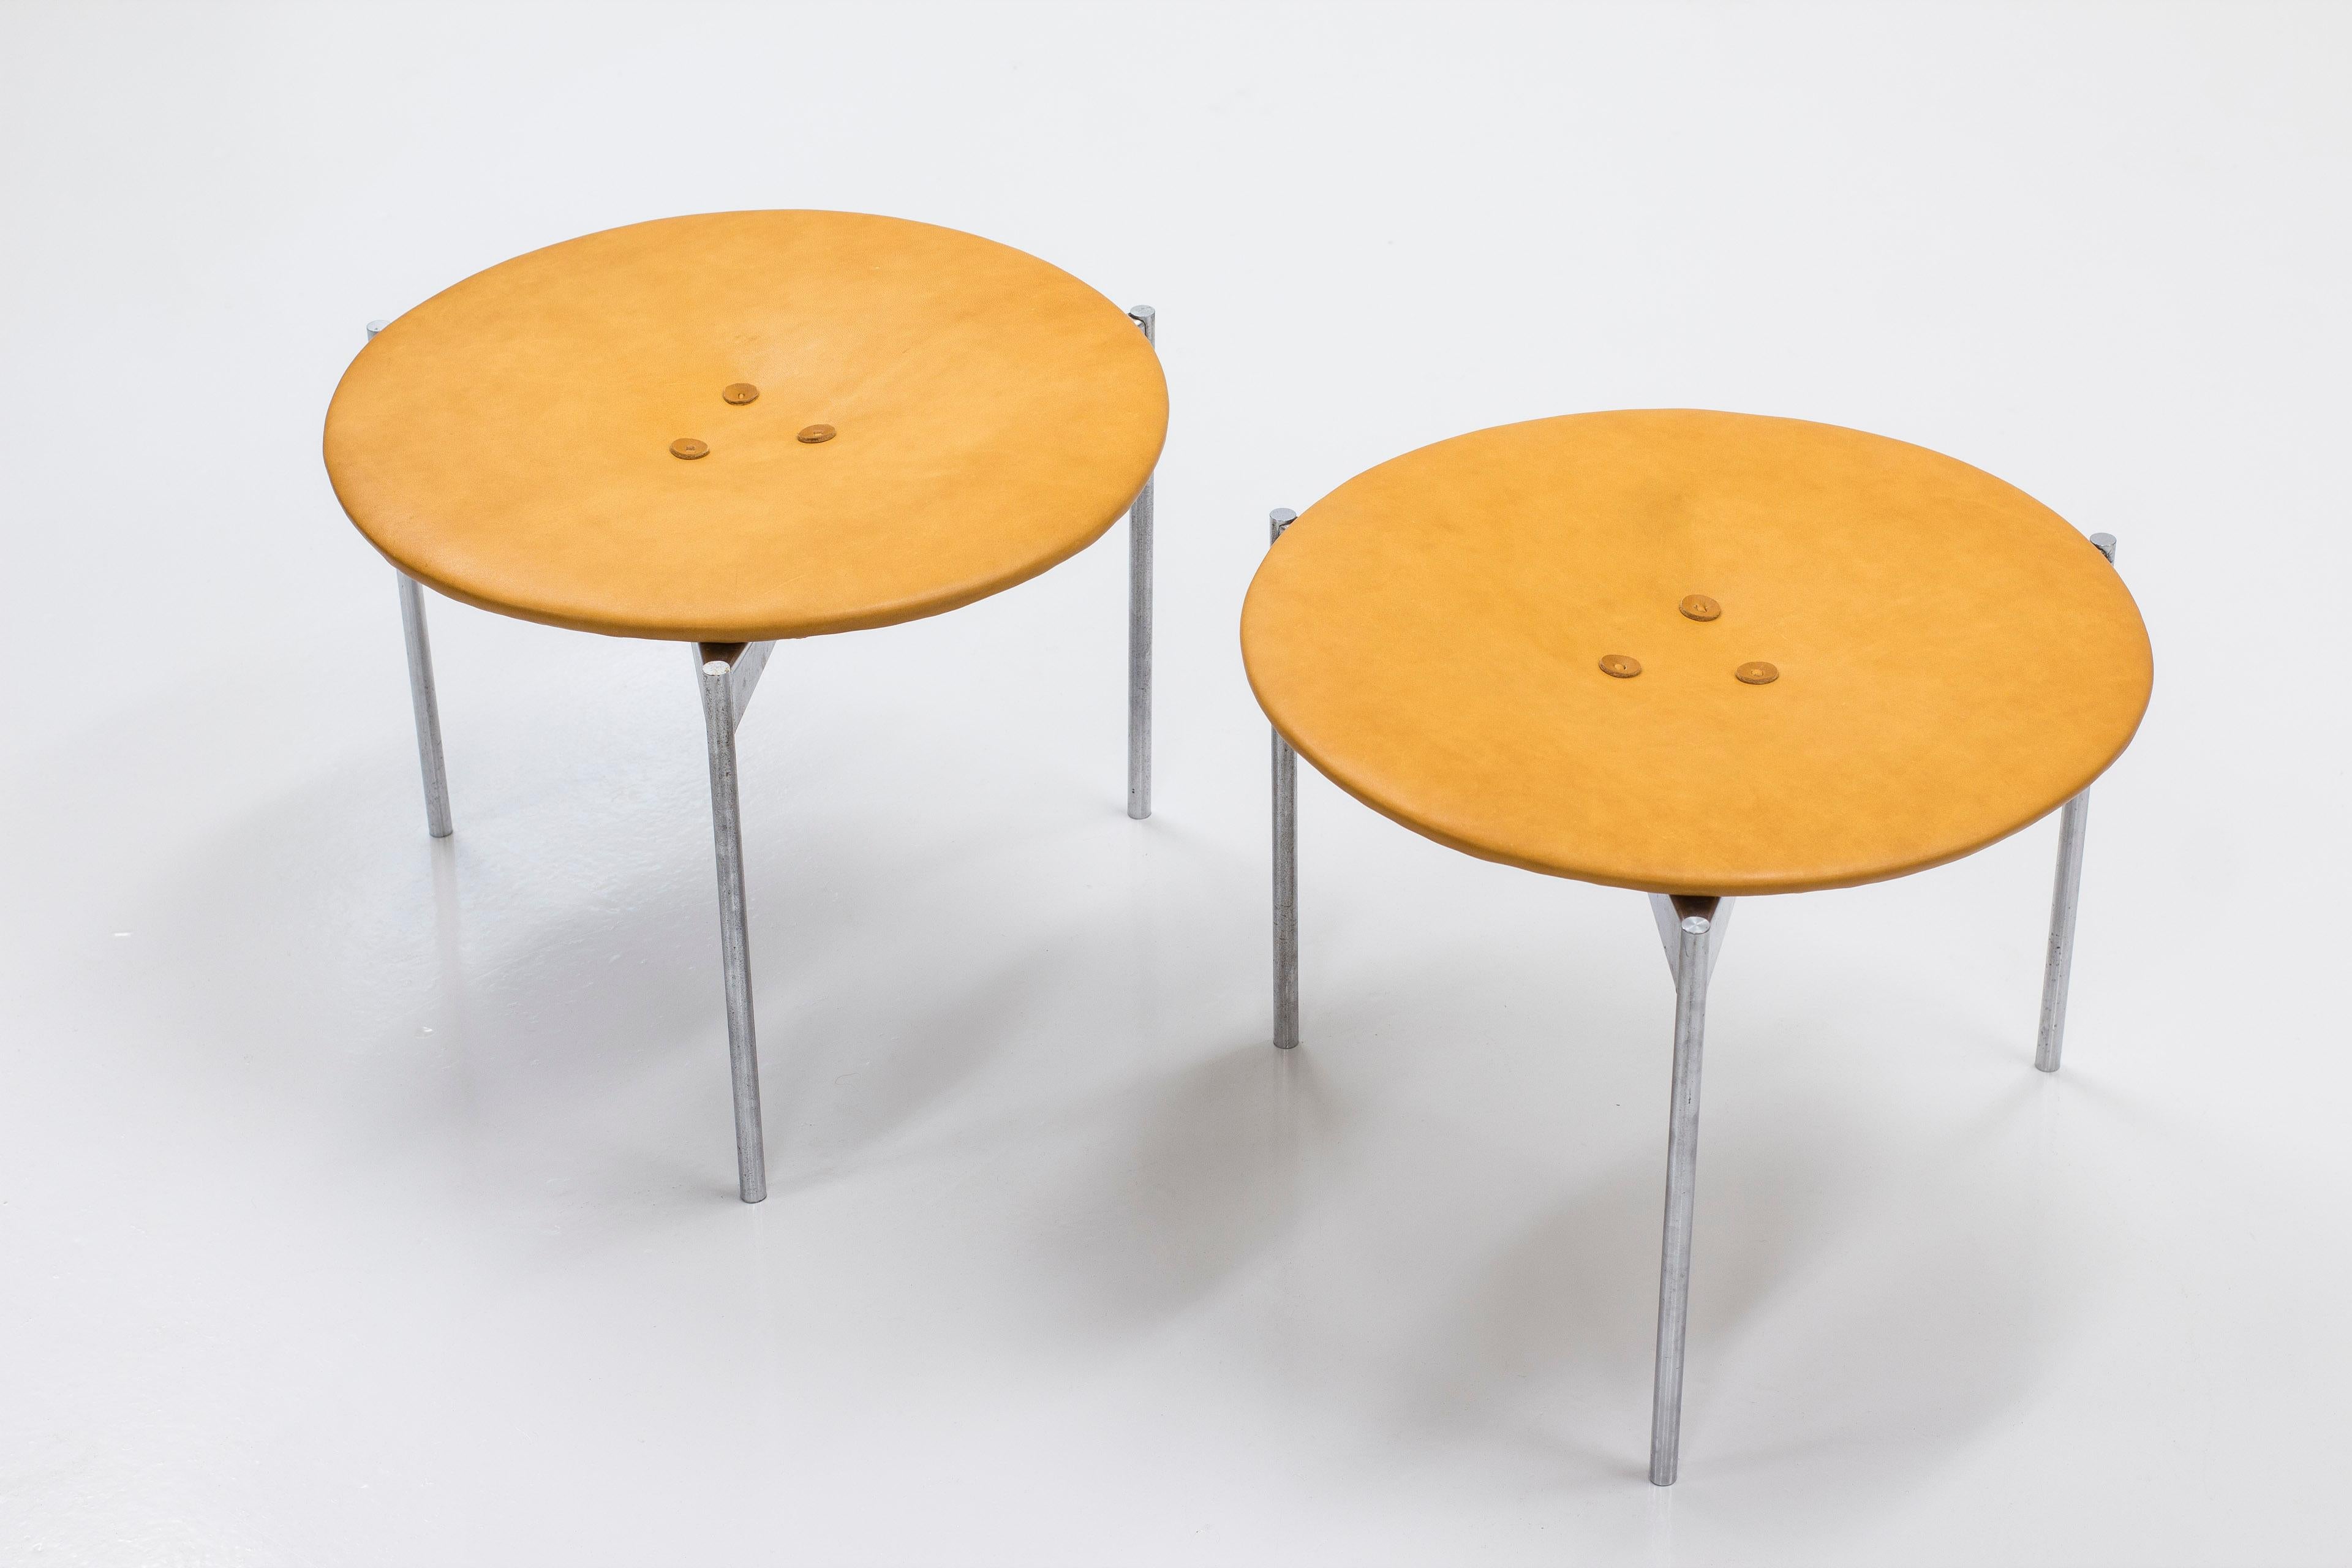 Rare pair of stools designed by Uno & Östen Kristiansson. Produced in Sweden by Luxus during the 1960s. Stainless steel legs and seats reupholstered in vegetable cognac leather. Very good vintage condition with few signs of wear and light patina.